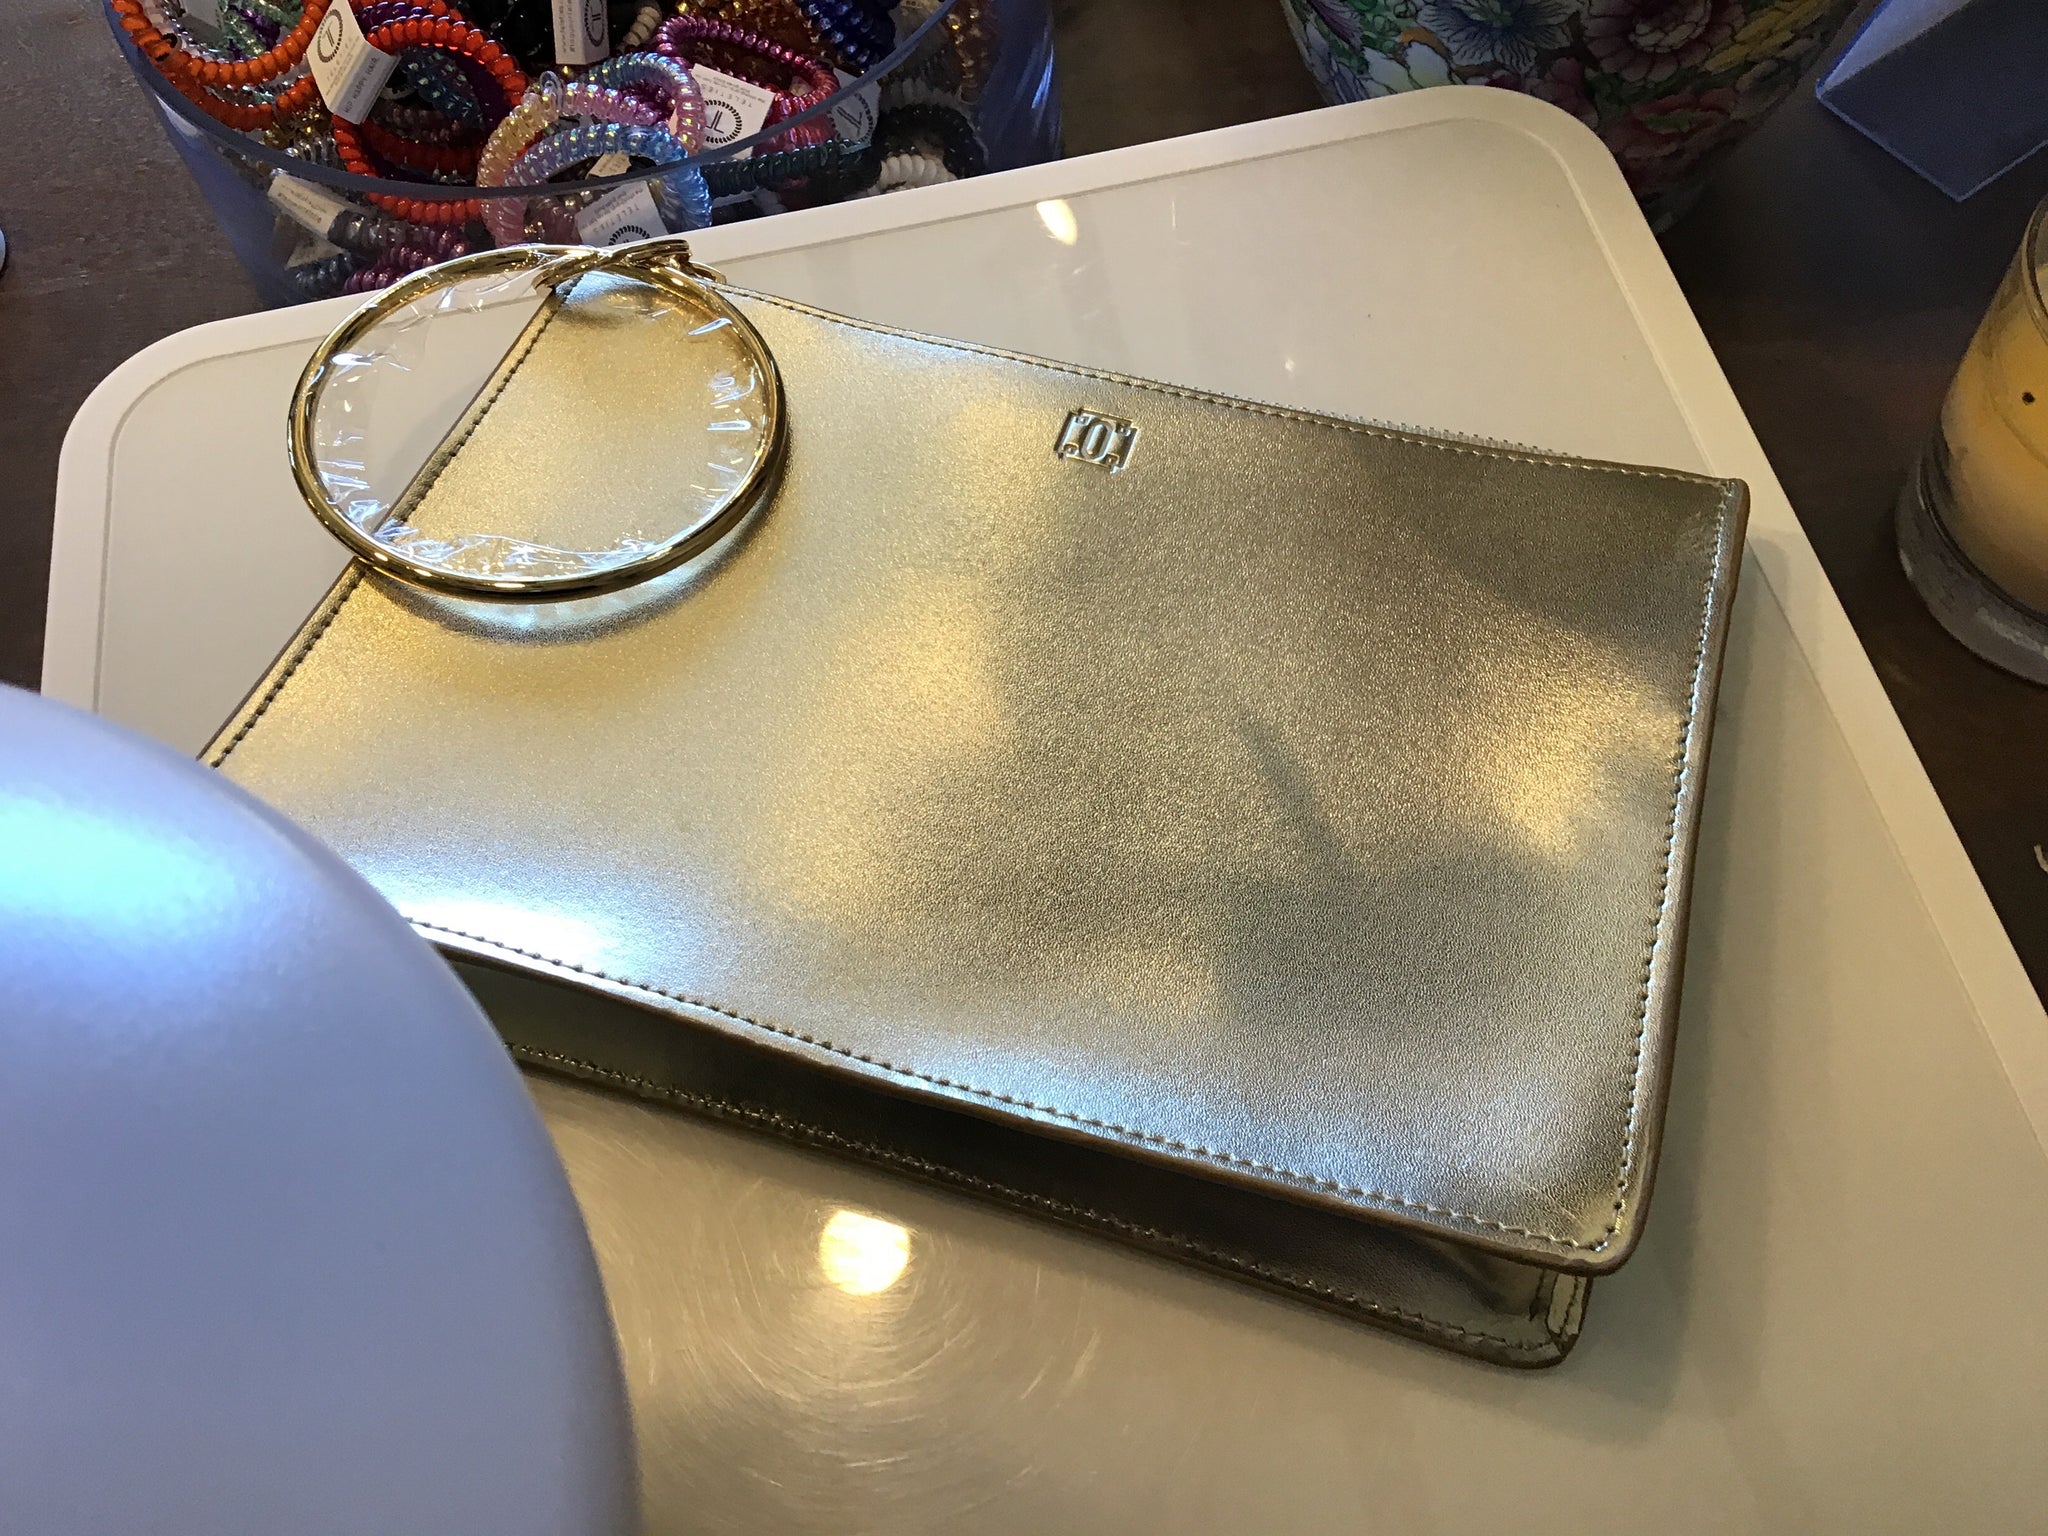 Oventure gold leather wristlet